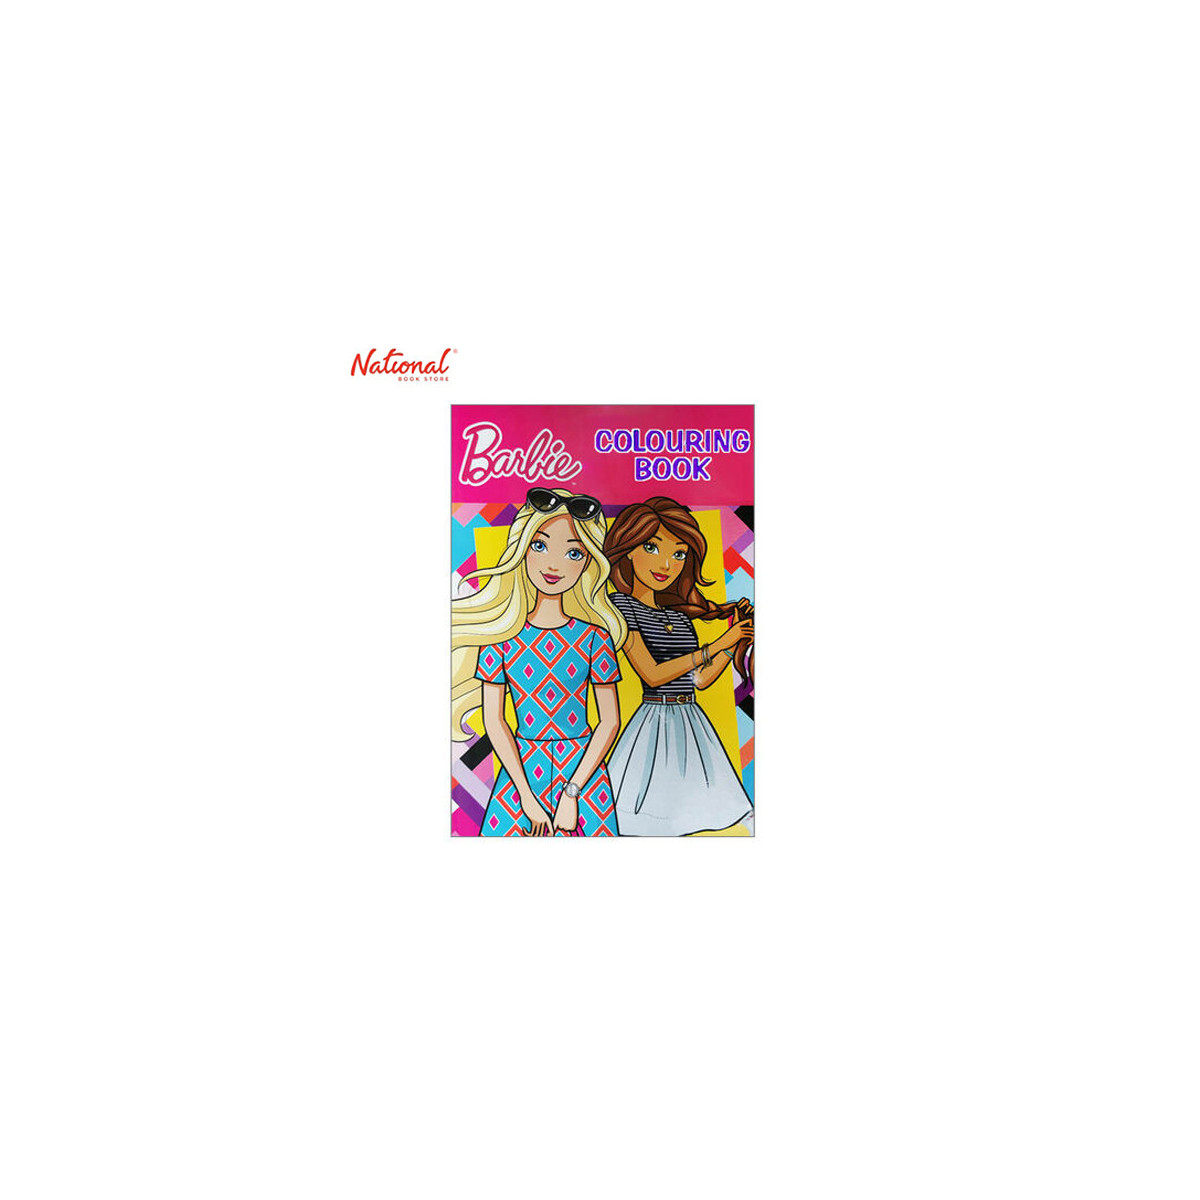 Barbie And Friends Colouring Book Trade Paperback